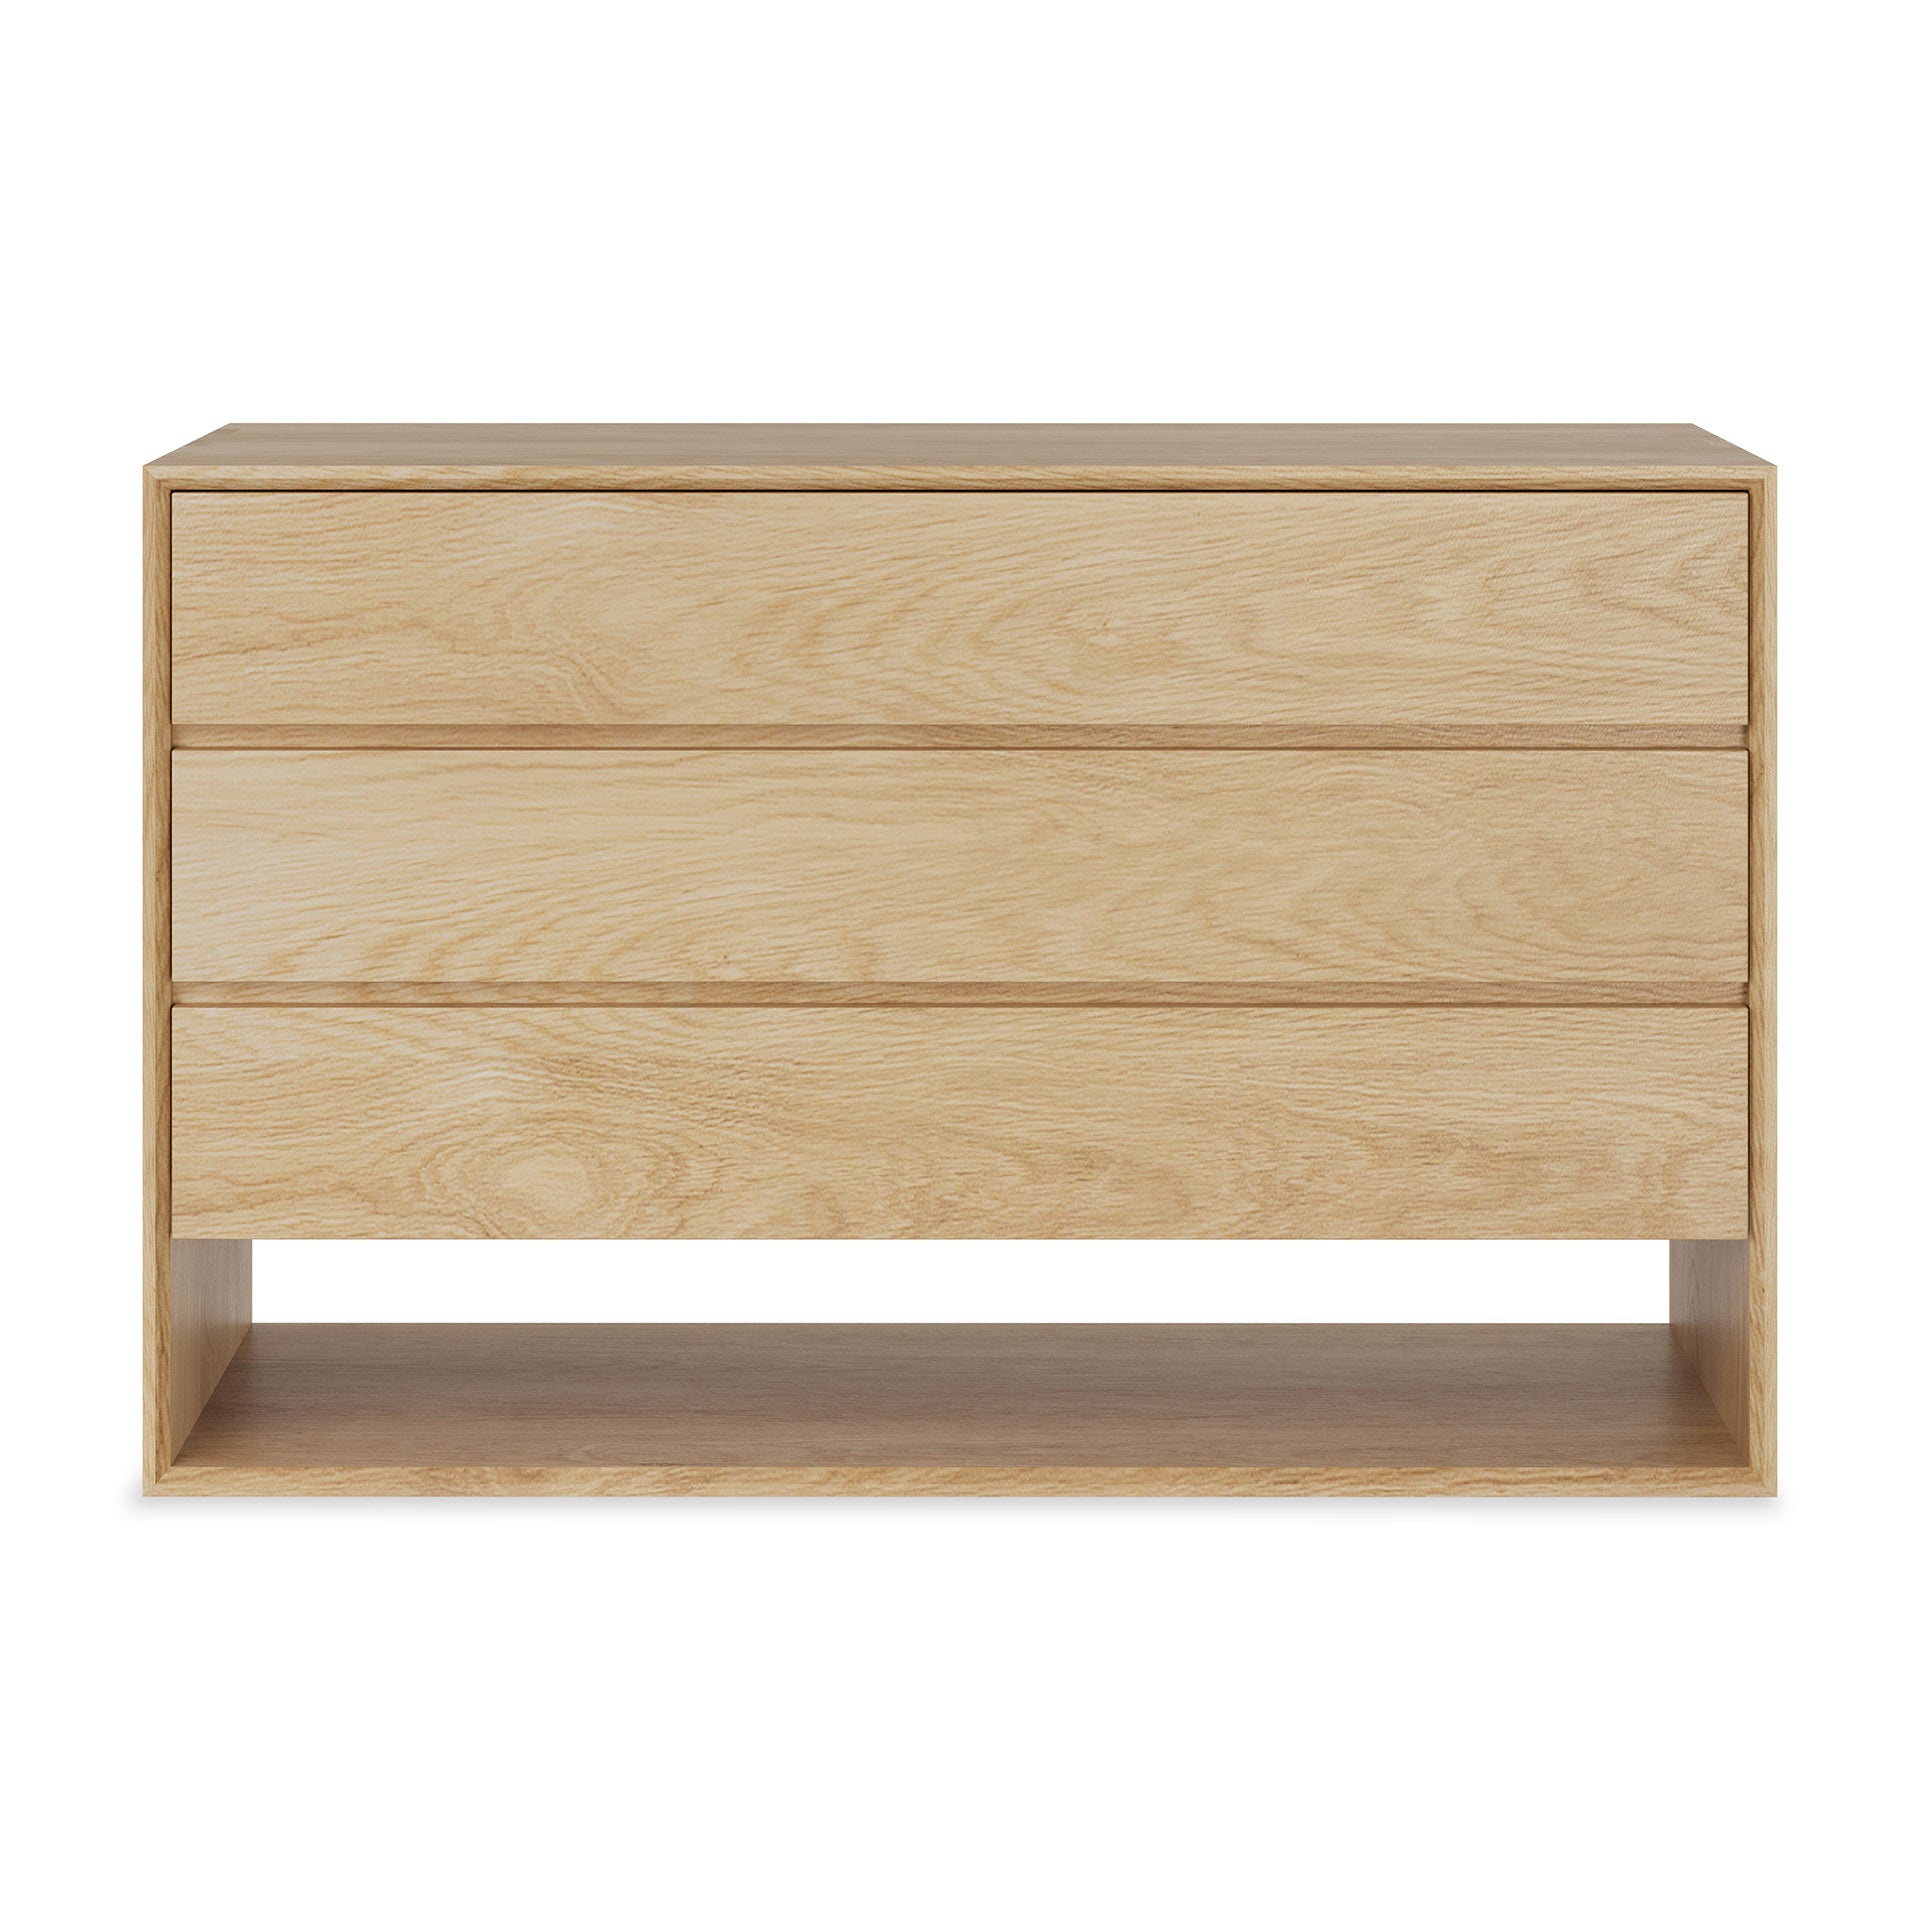 Ethnicraft Oak Nordic Dresser Chest of Drawers Tallboy is available from Make Your House A Home, Bendigo, Victoria, Australia